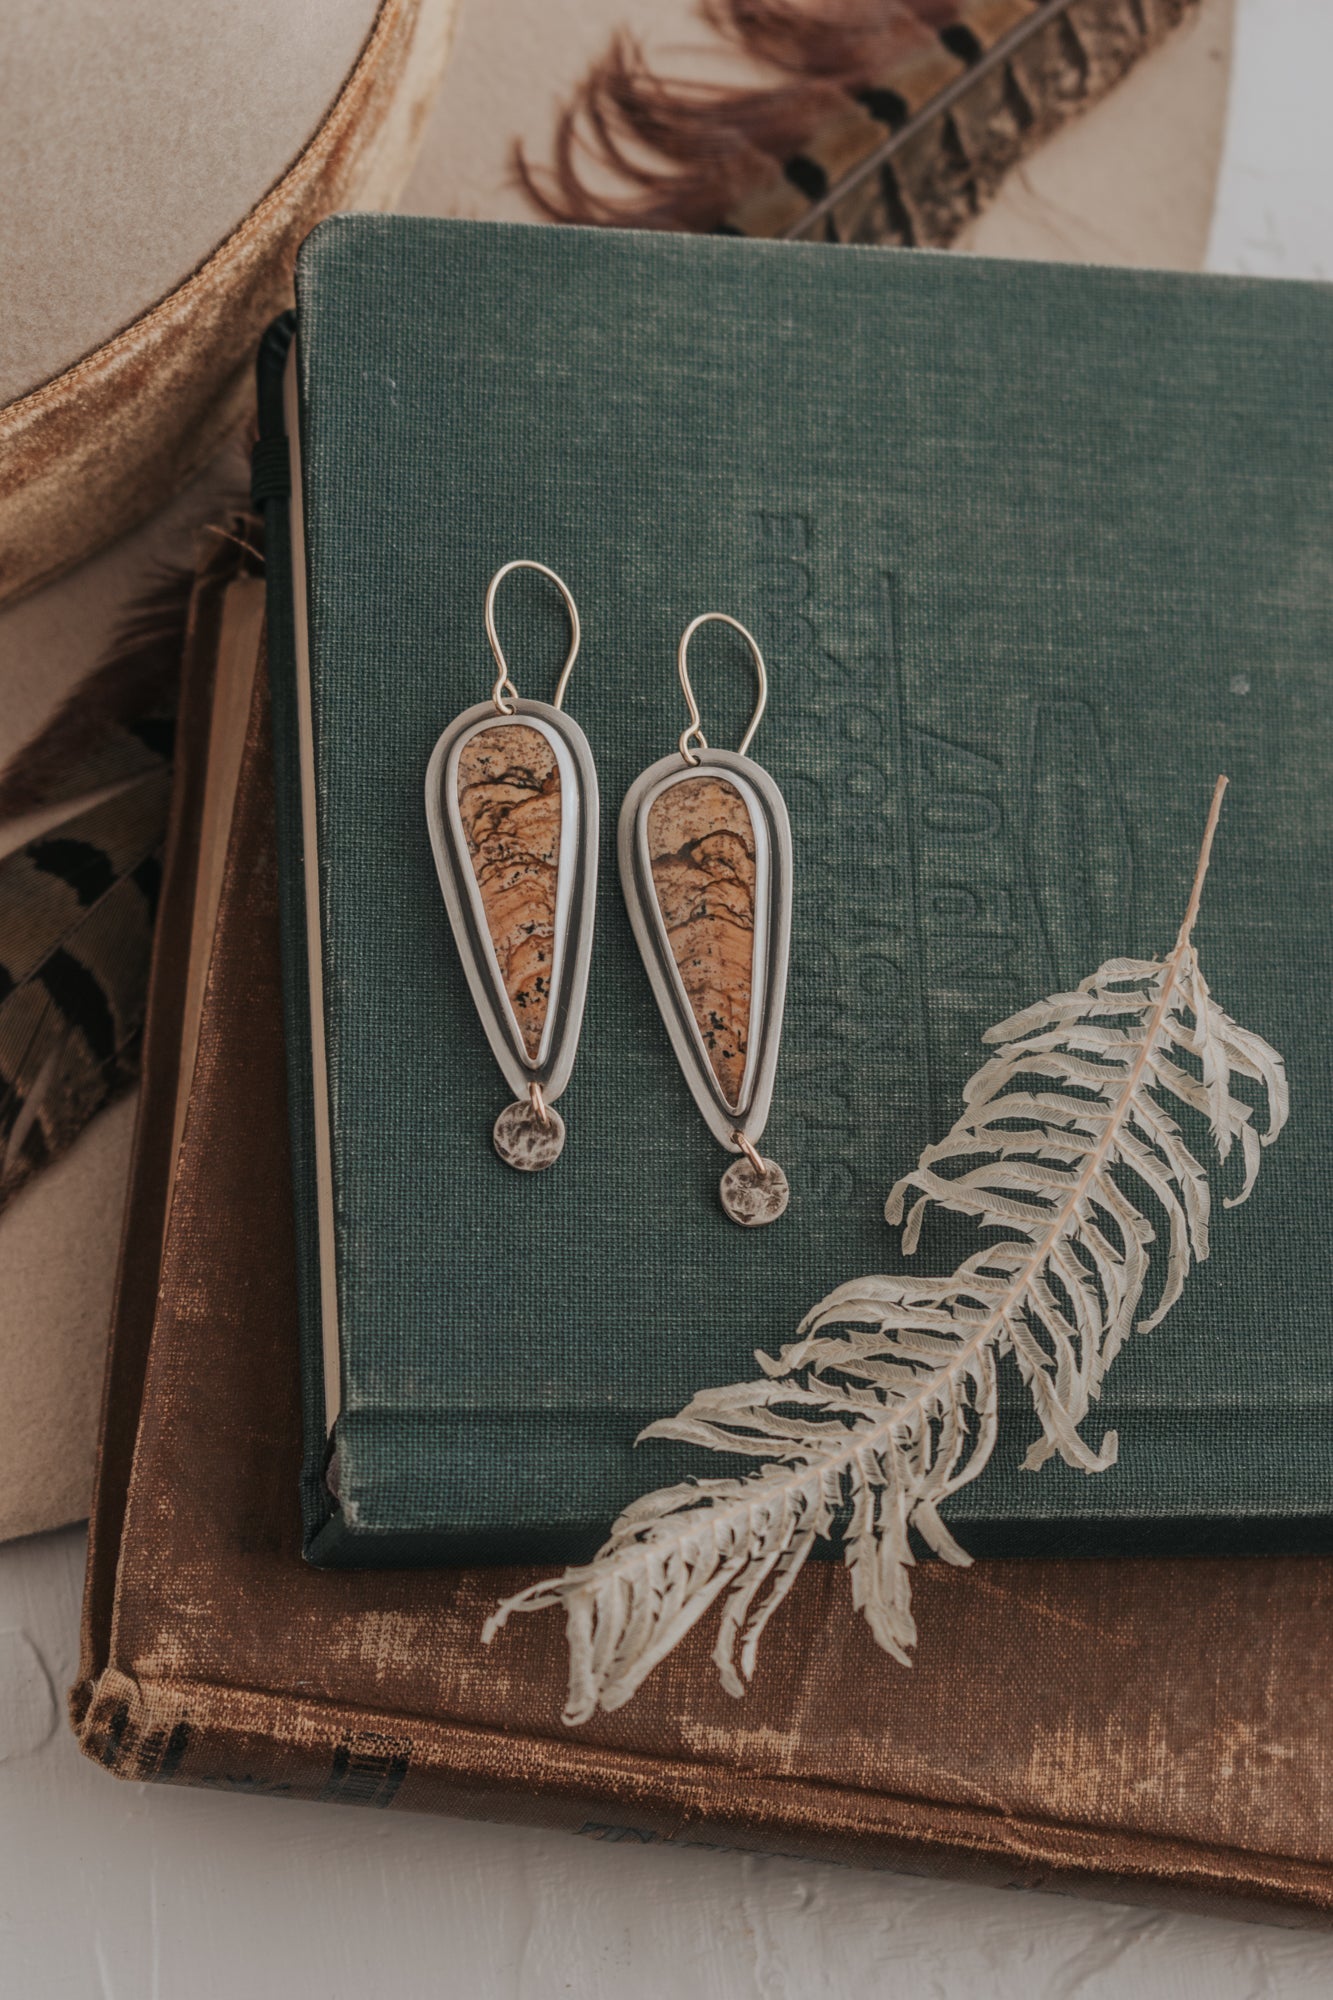 Picture Jasper + Silver Dot Statement Earrings with Gold-Fill Accents - Third Hand Silversmith LLC handmade jewelry, Bozeman, Montana